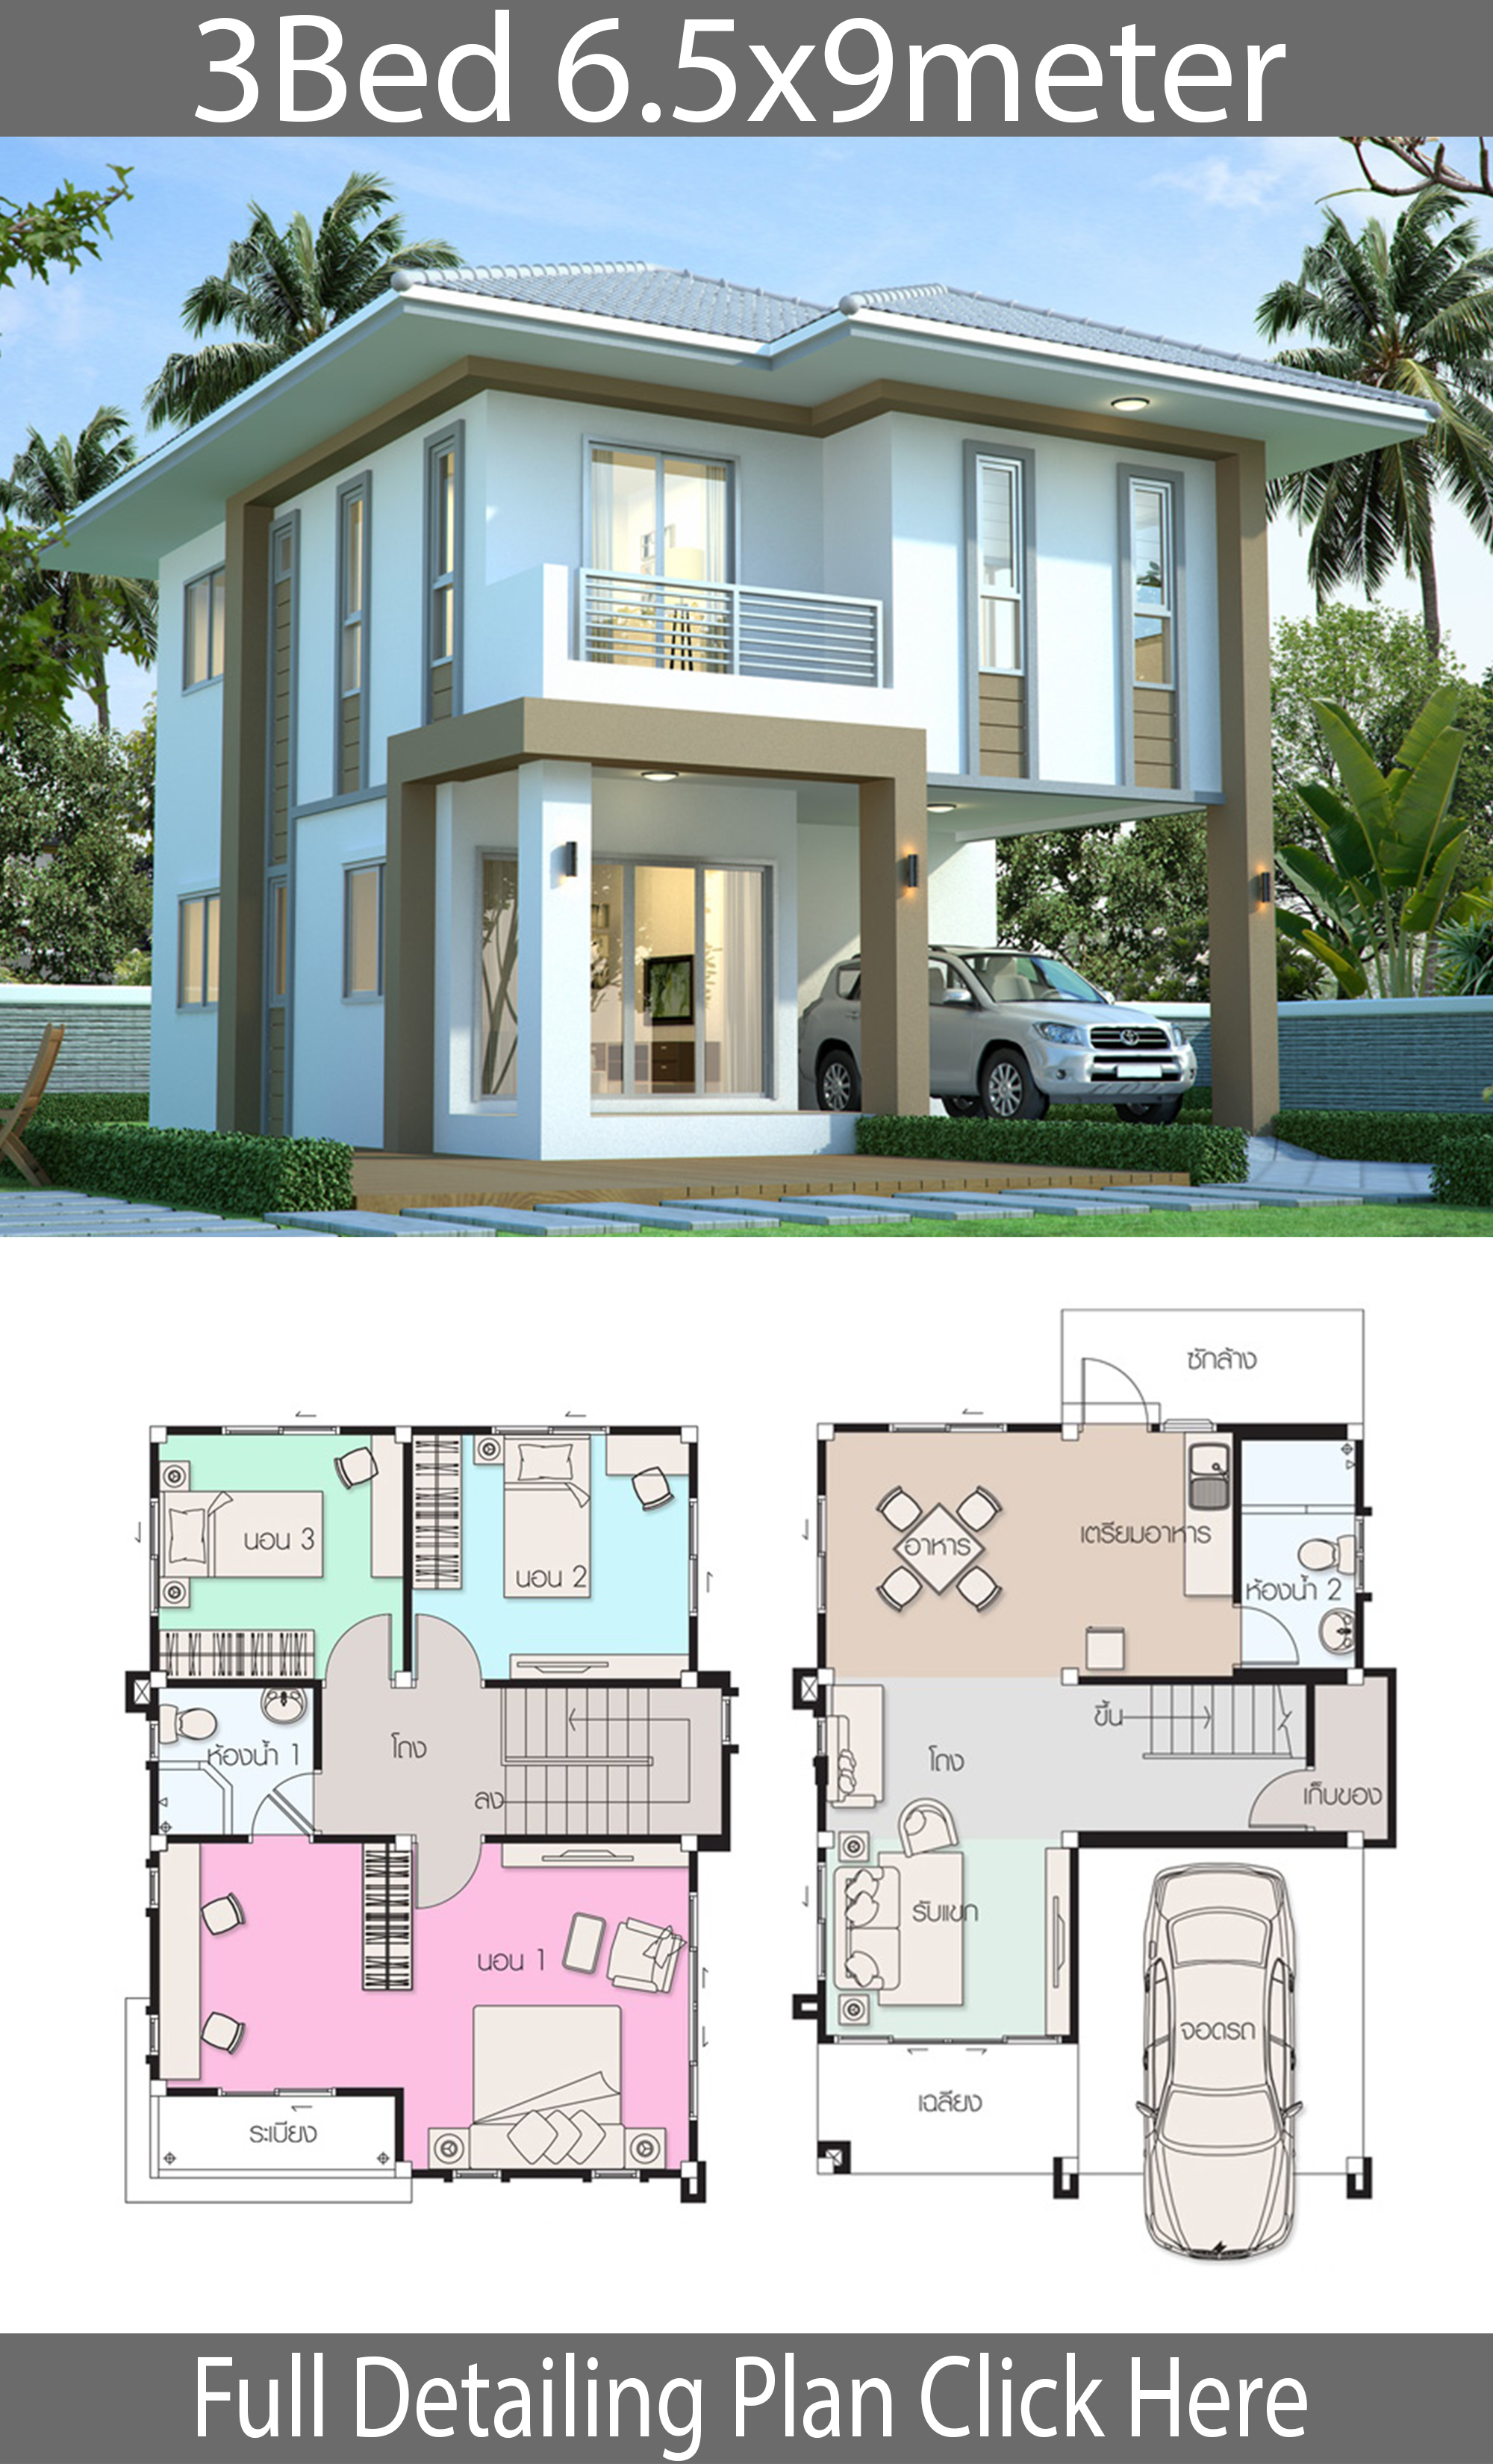 2 Bedroom House Building Plans Contemporary Two Story House Plan With